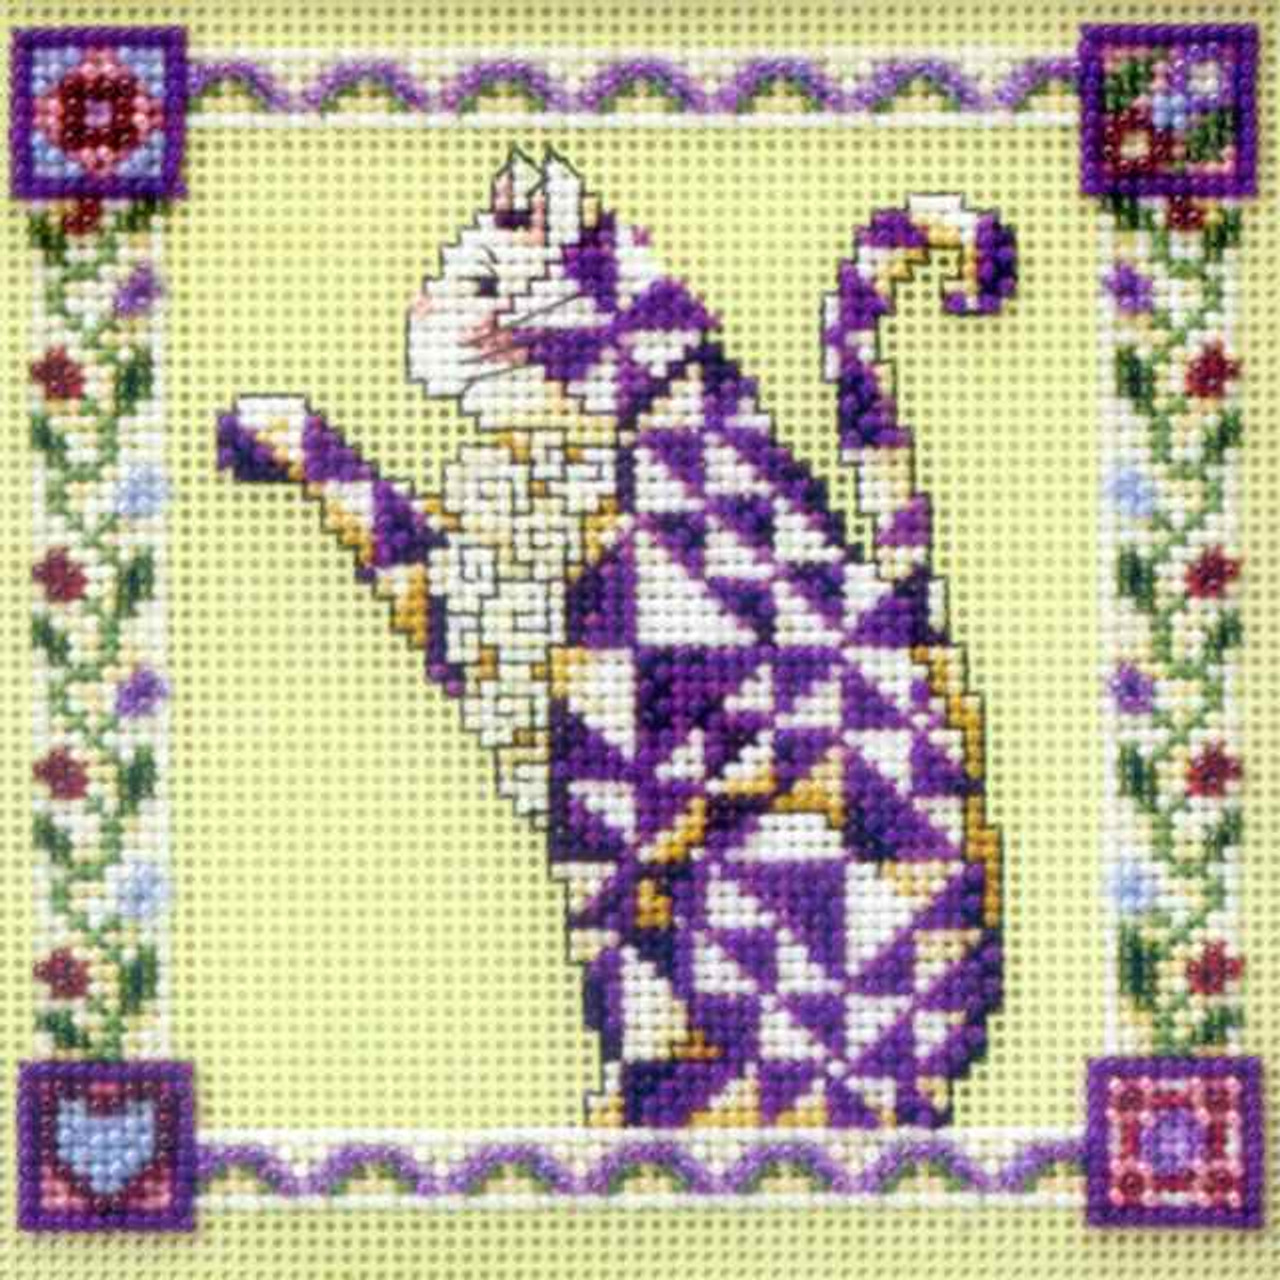 Petunia Beaded Counted Cross Stitch Kit Mill Hill 2008 Jim Shore Quilted Cats